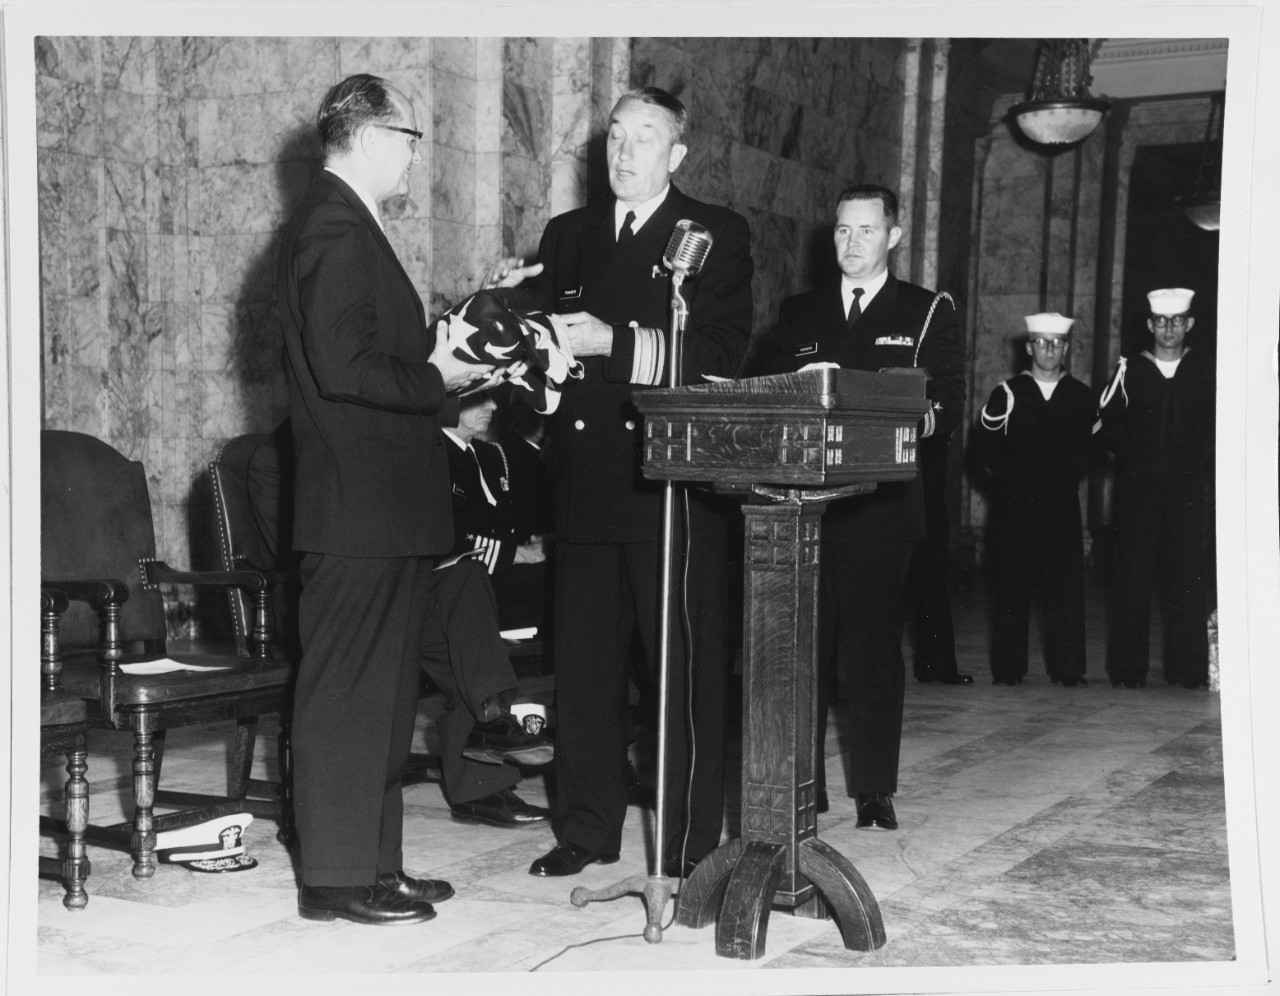 Rear Admiral Towner presenting the flag from Battleship USS WASHINGTON (BB-56) to Governor Rosseleni